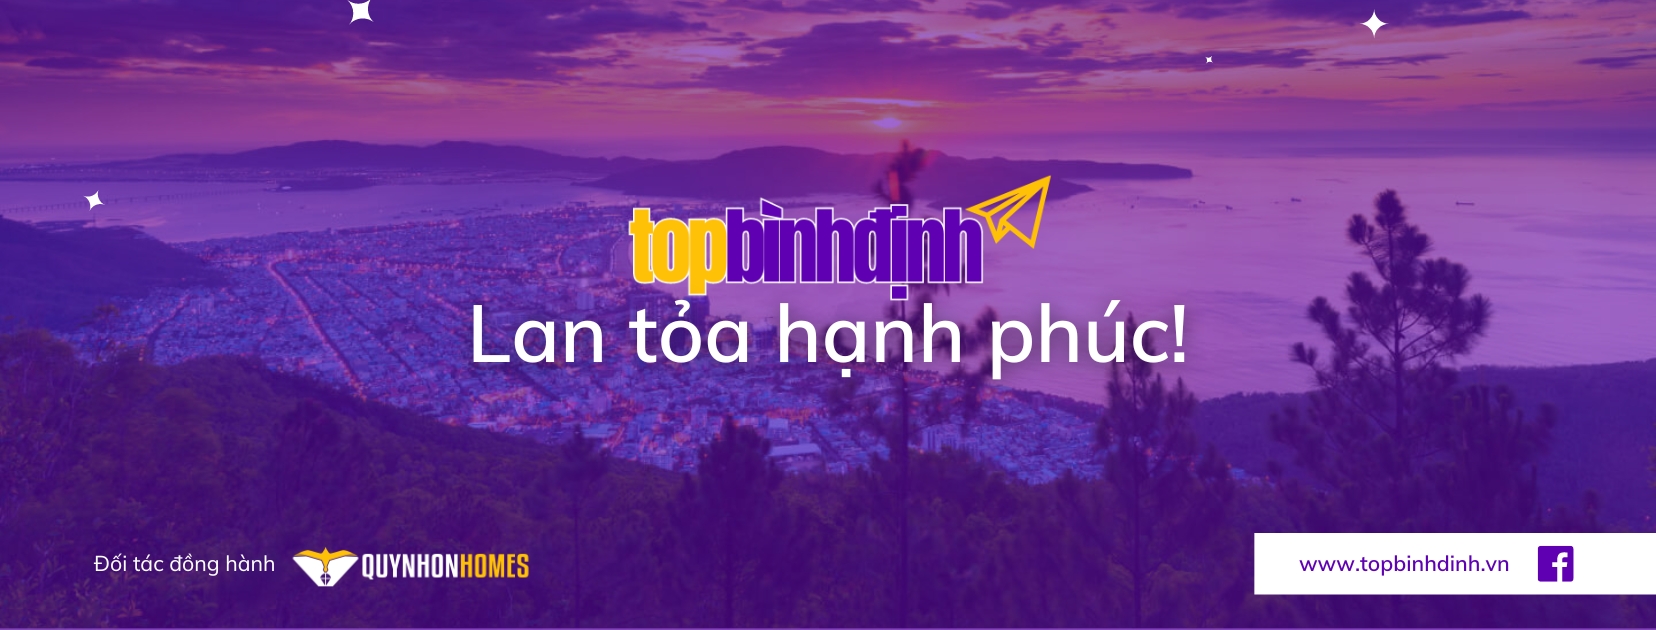 cover top binh dinh